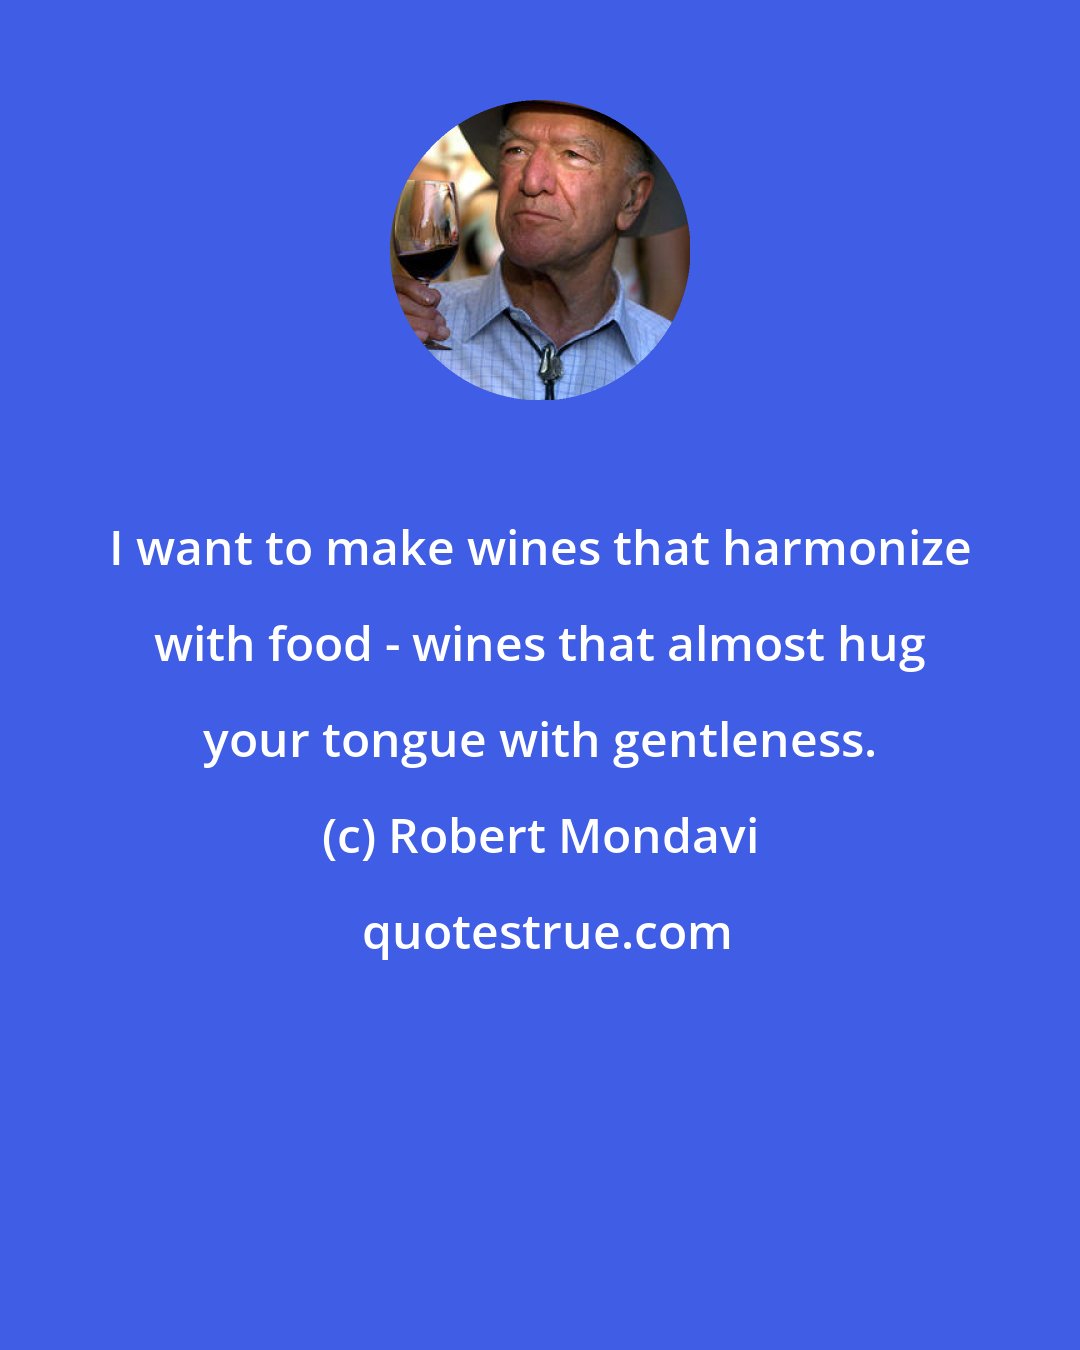 Robert Mondavi: I want to make wines that harmonize with food - wines that almost hug your tongue with gentleness.